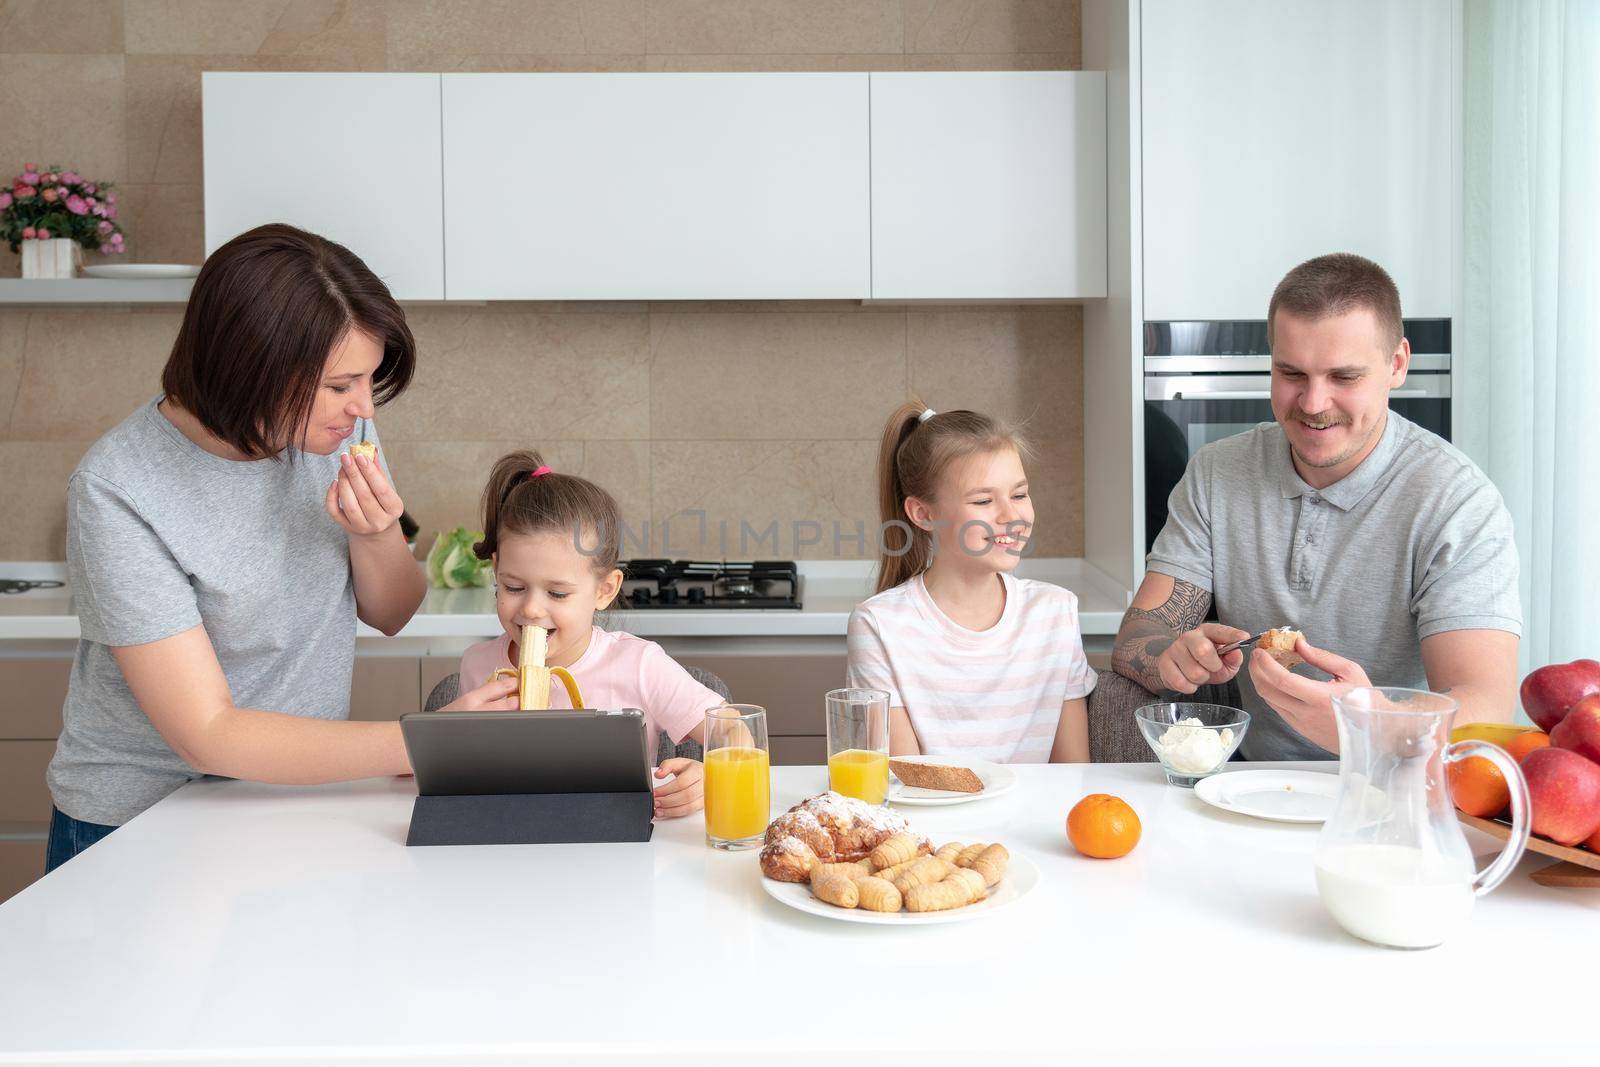 Smiling Family Dining Together at kitchen table